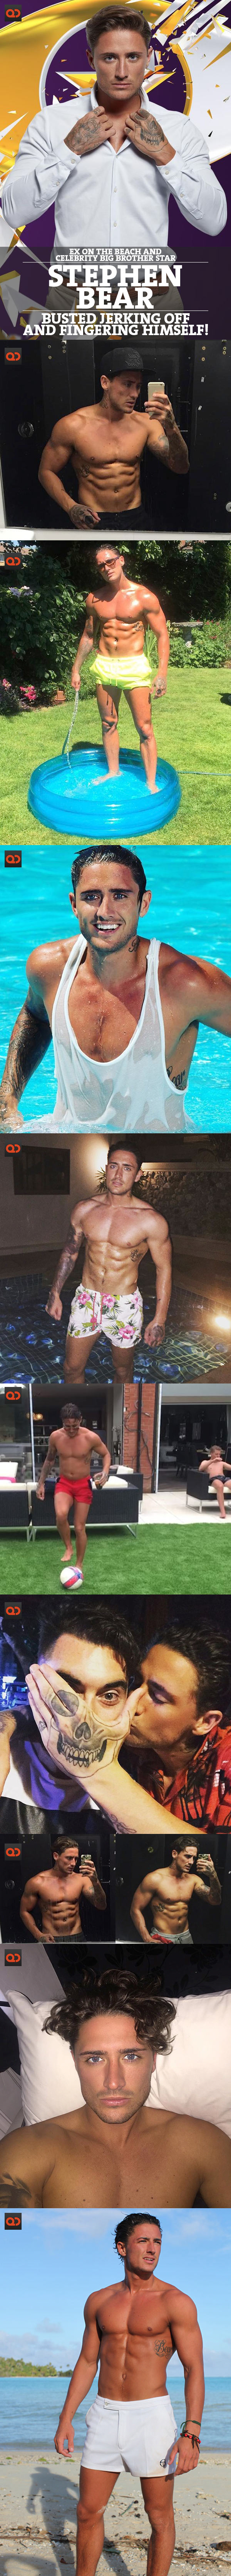 Stephen Bear, Ex On The Beach And Celebrity Big Brother Star, Busted Jerking Off And Fingering Himself!